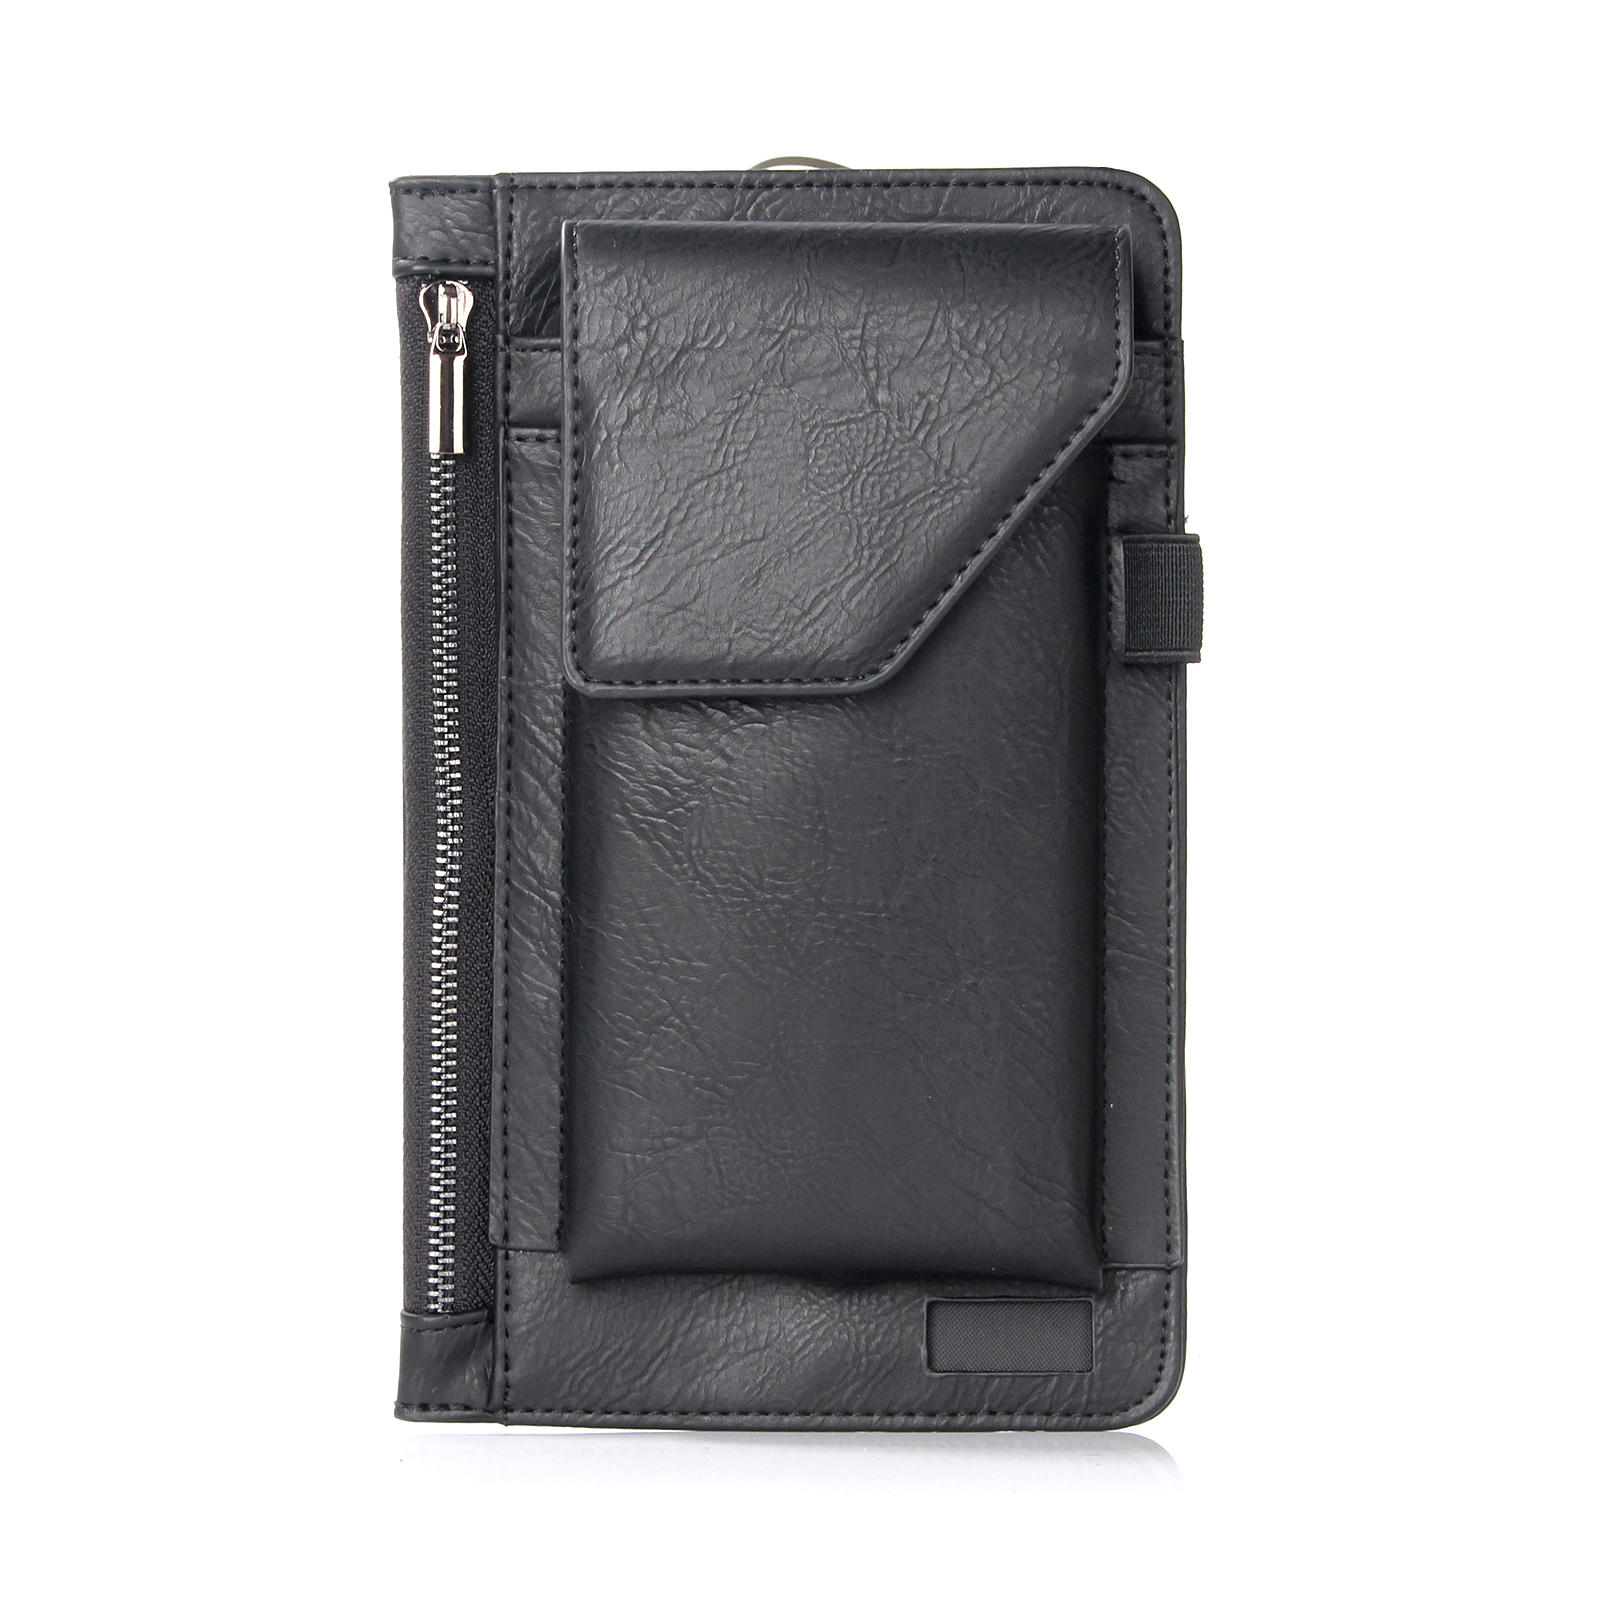 Bakeey-Casual-Vintage-Bussiness-Multi-Pocket-Reserve-Charging-Port-PU-Leather-Mobile-Phone-Money-Hik-1692248-9